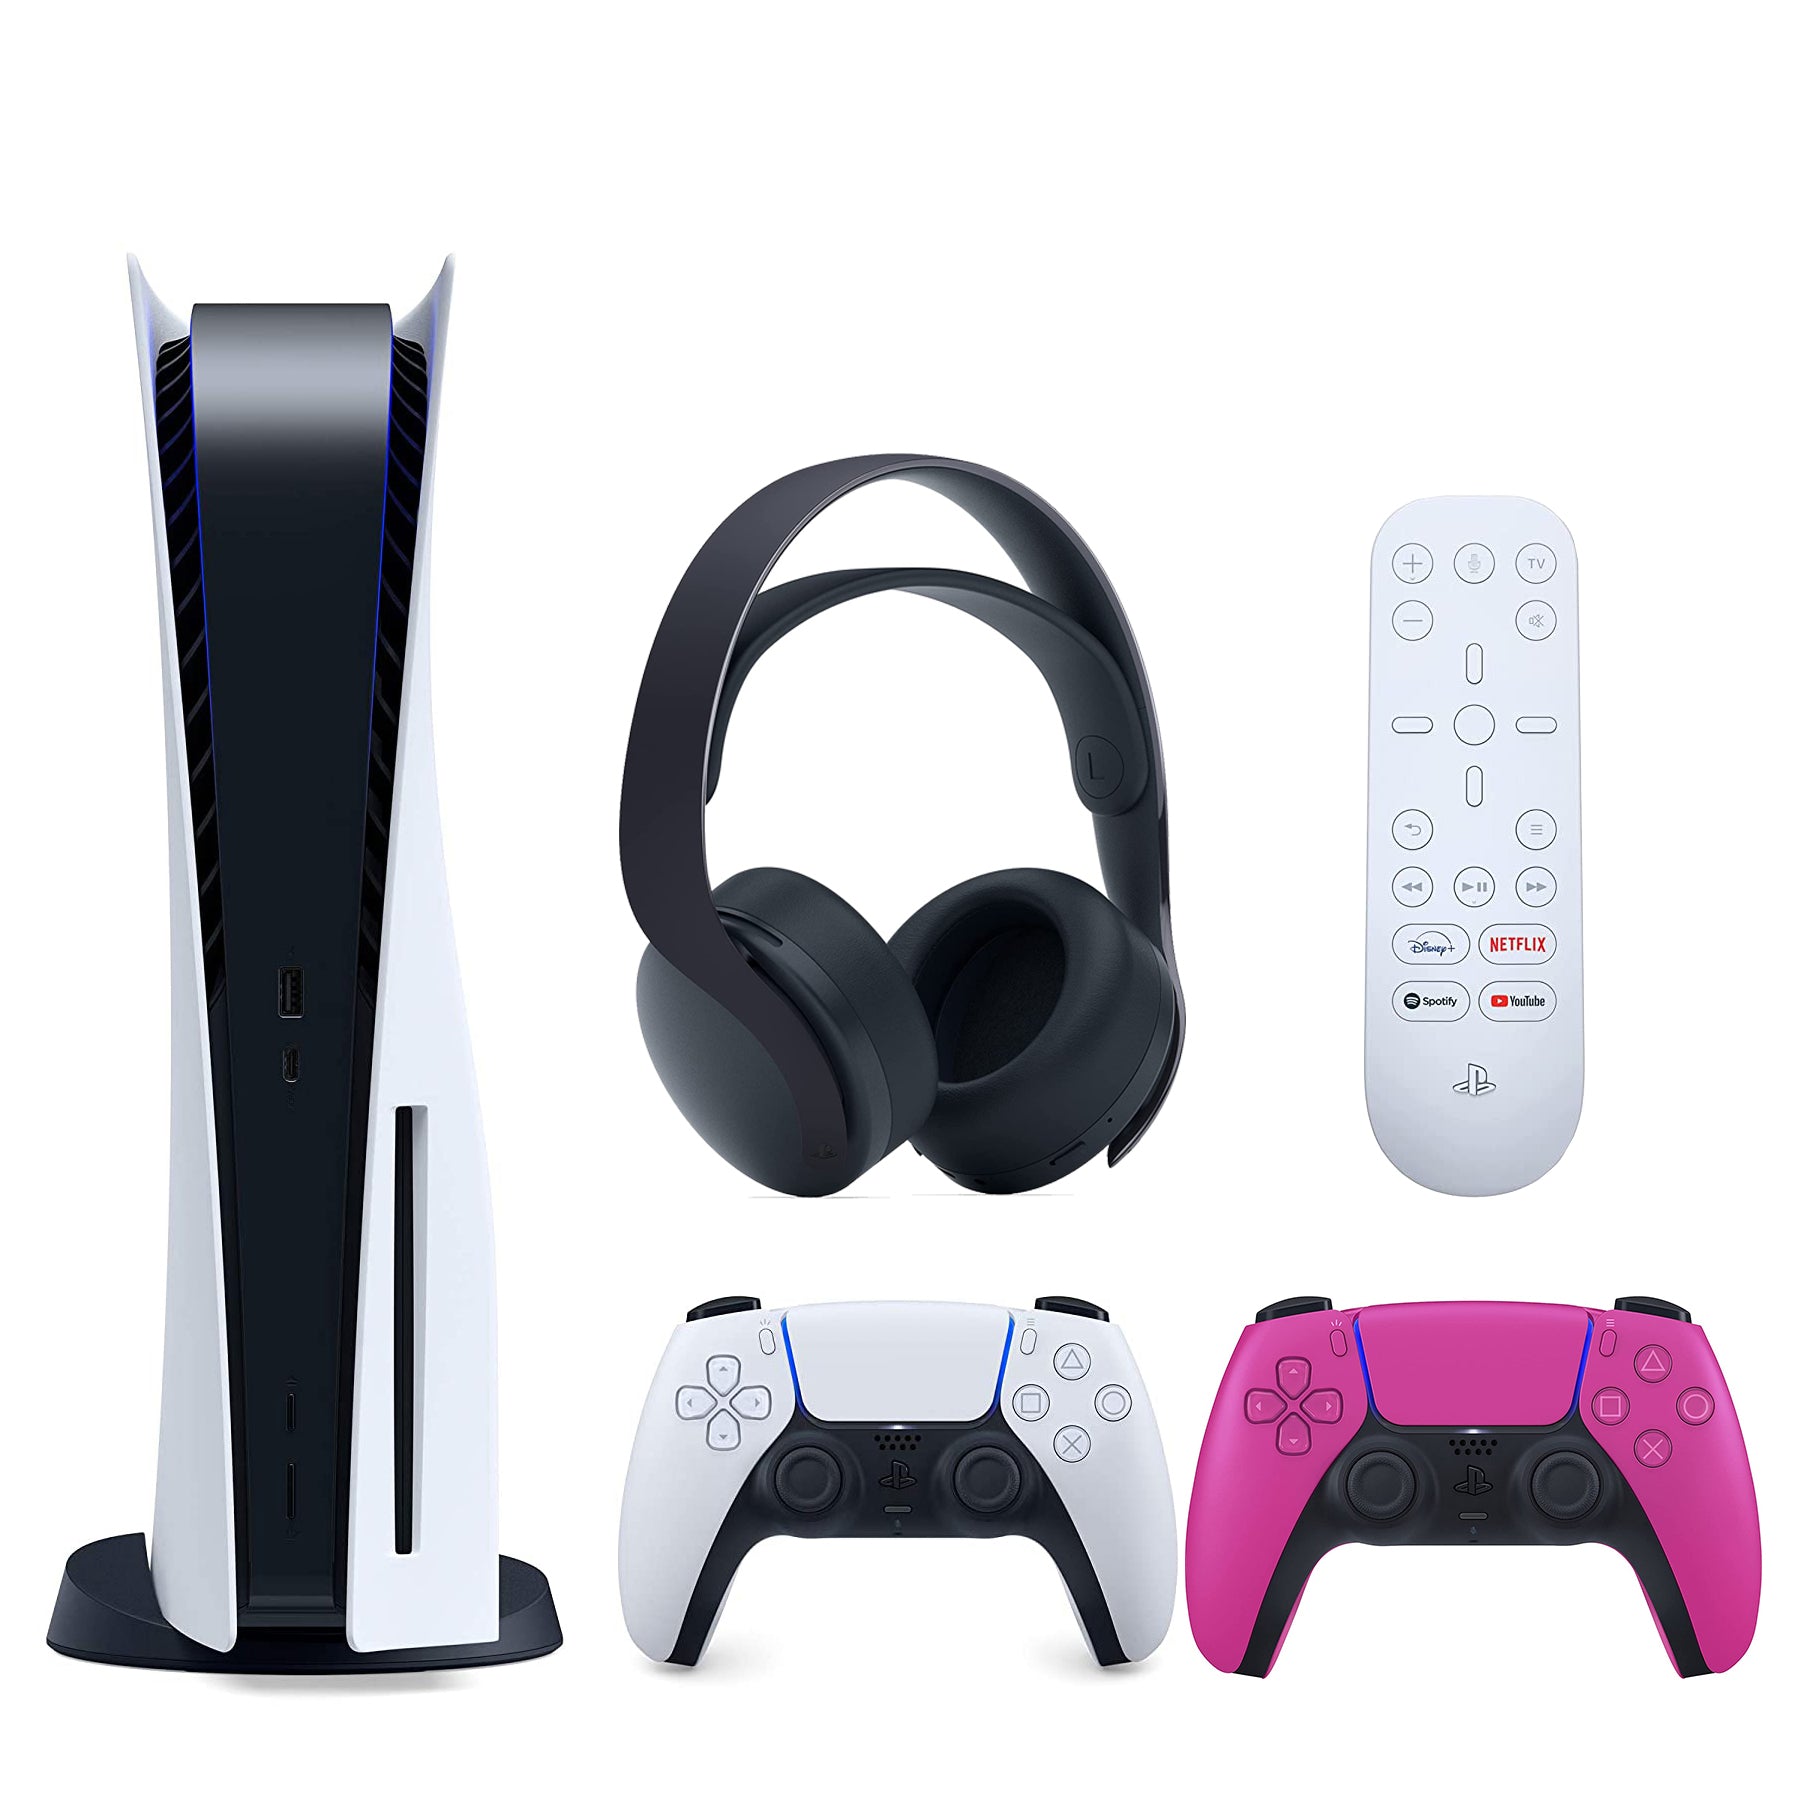 Sony Playstation 5 Disc Version (Sony PS5 Disc) with Extra Nova Pink Controller, Black PULSE 3D Headset and Dual Charging Station Bundle with Cleaning Cloth - Pro-Distributing